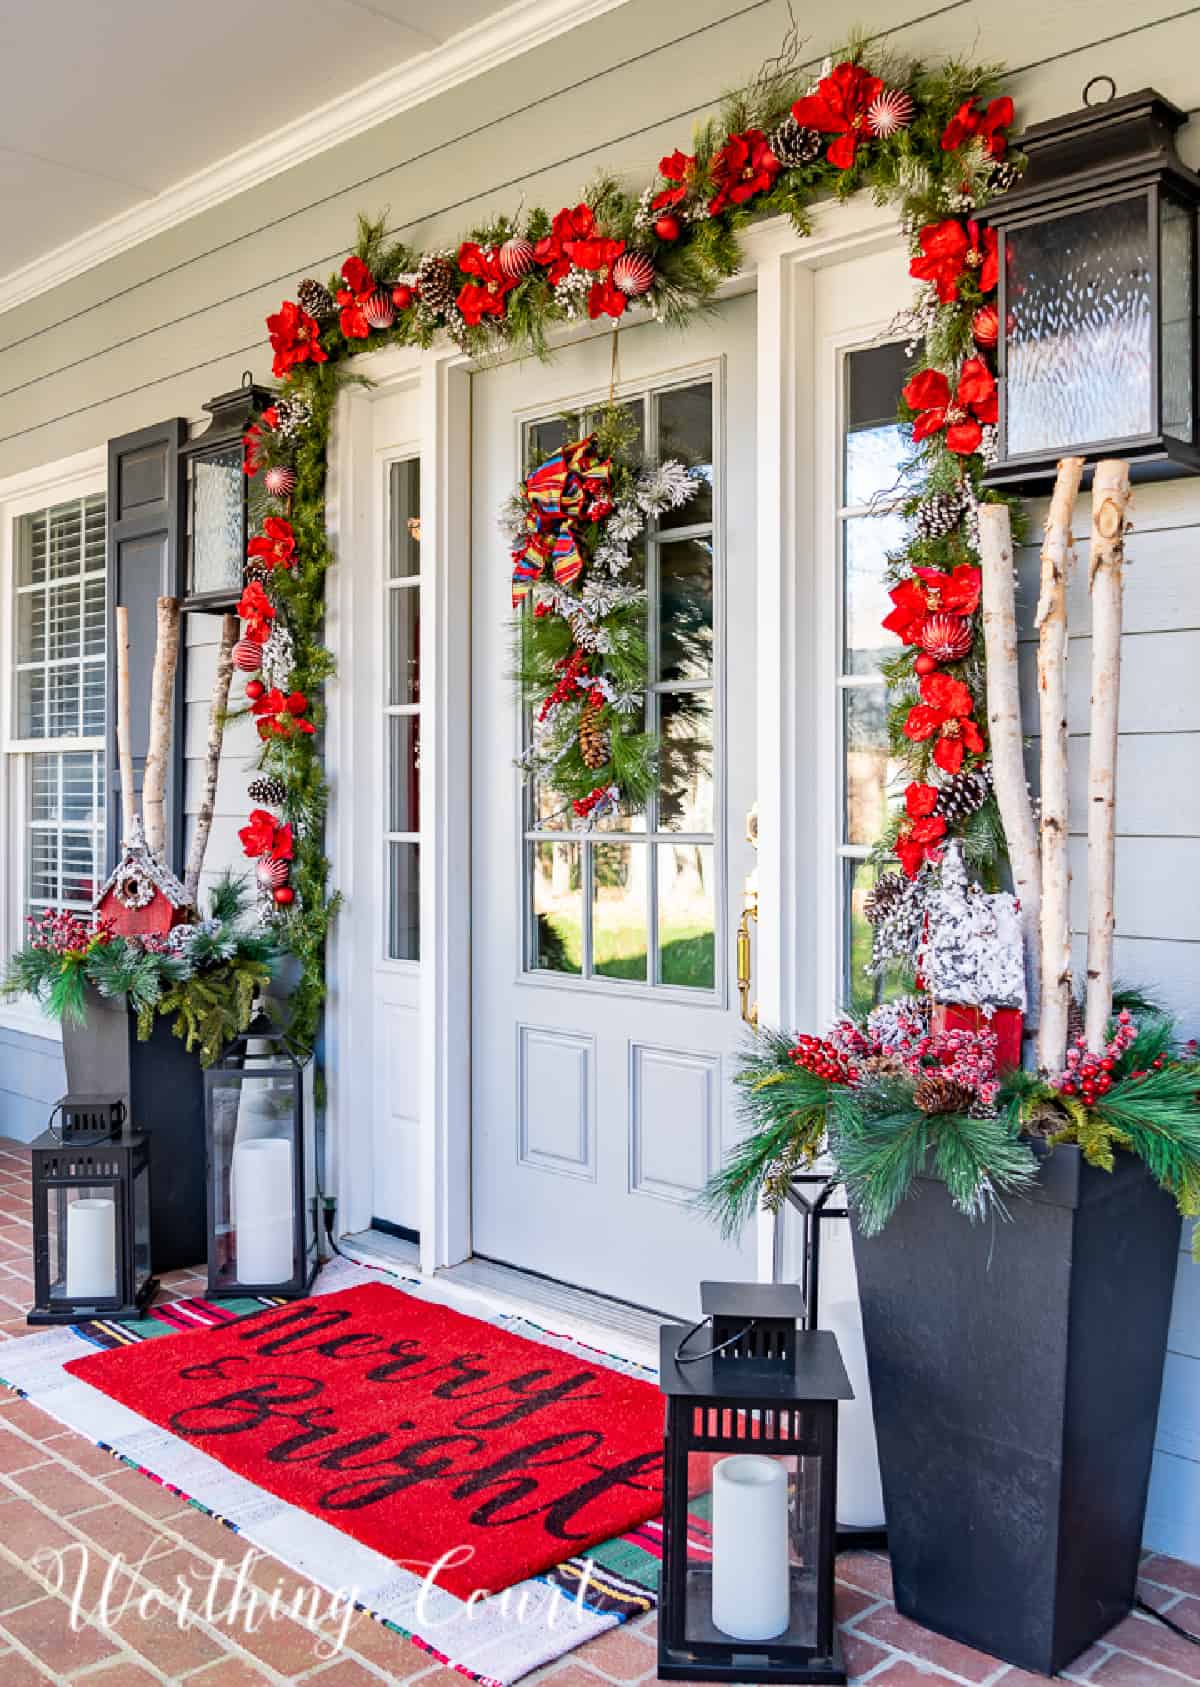 Helping Holiday Guests Feel Welcome